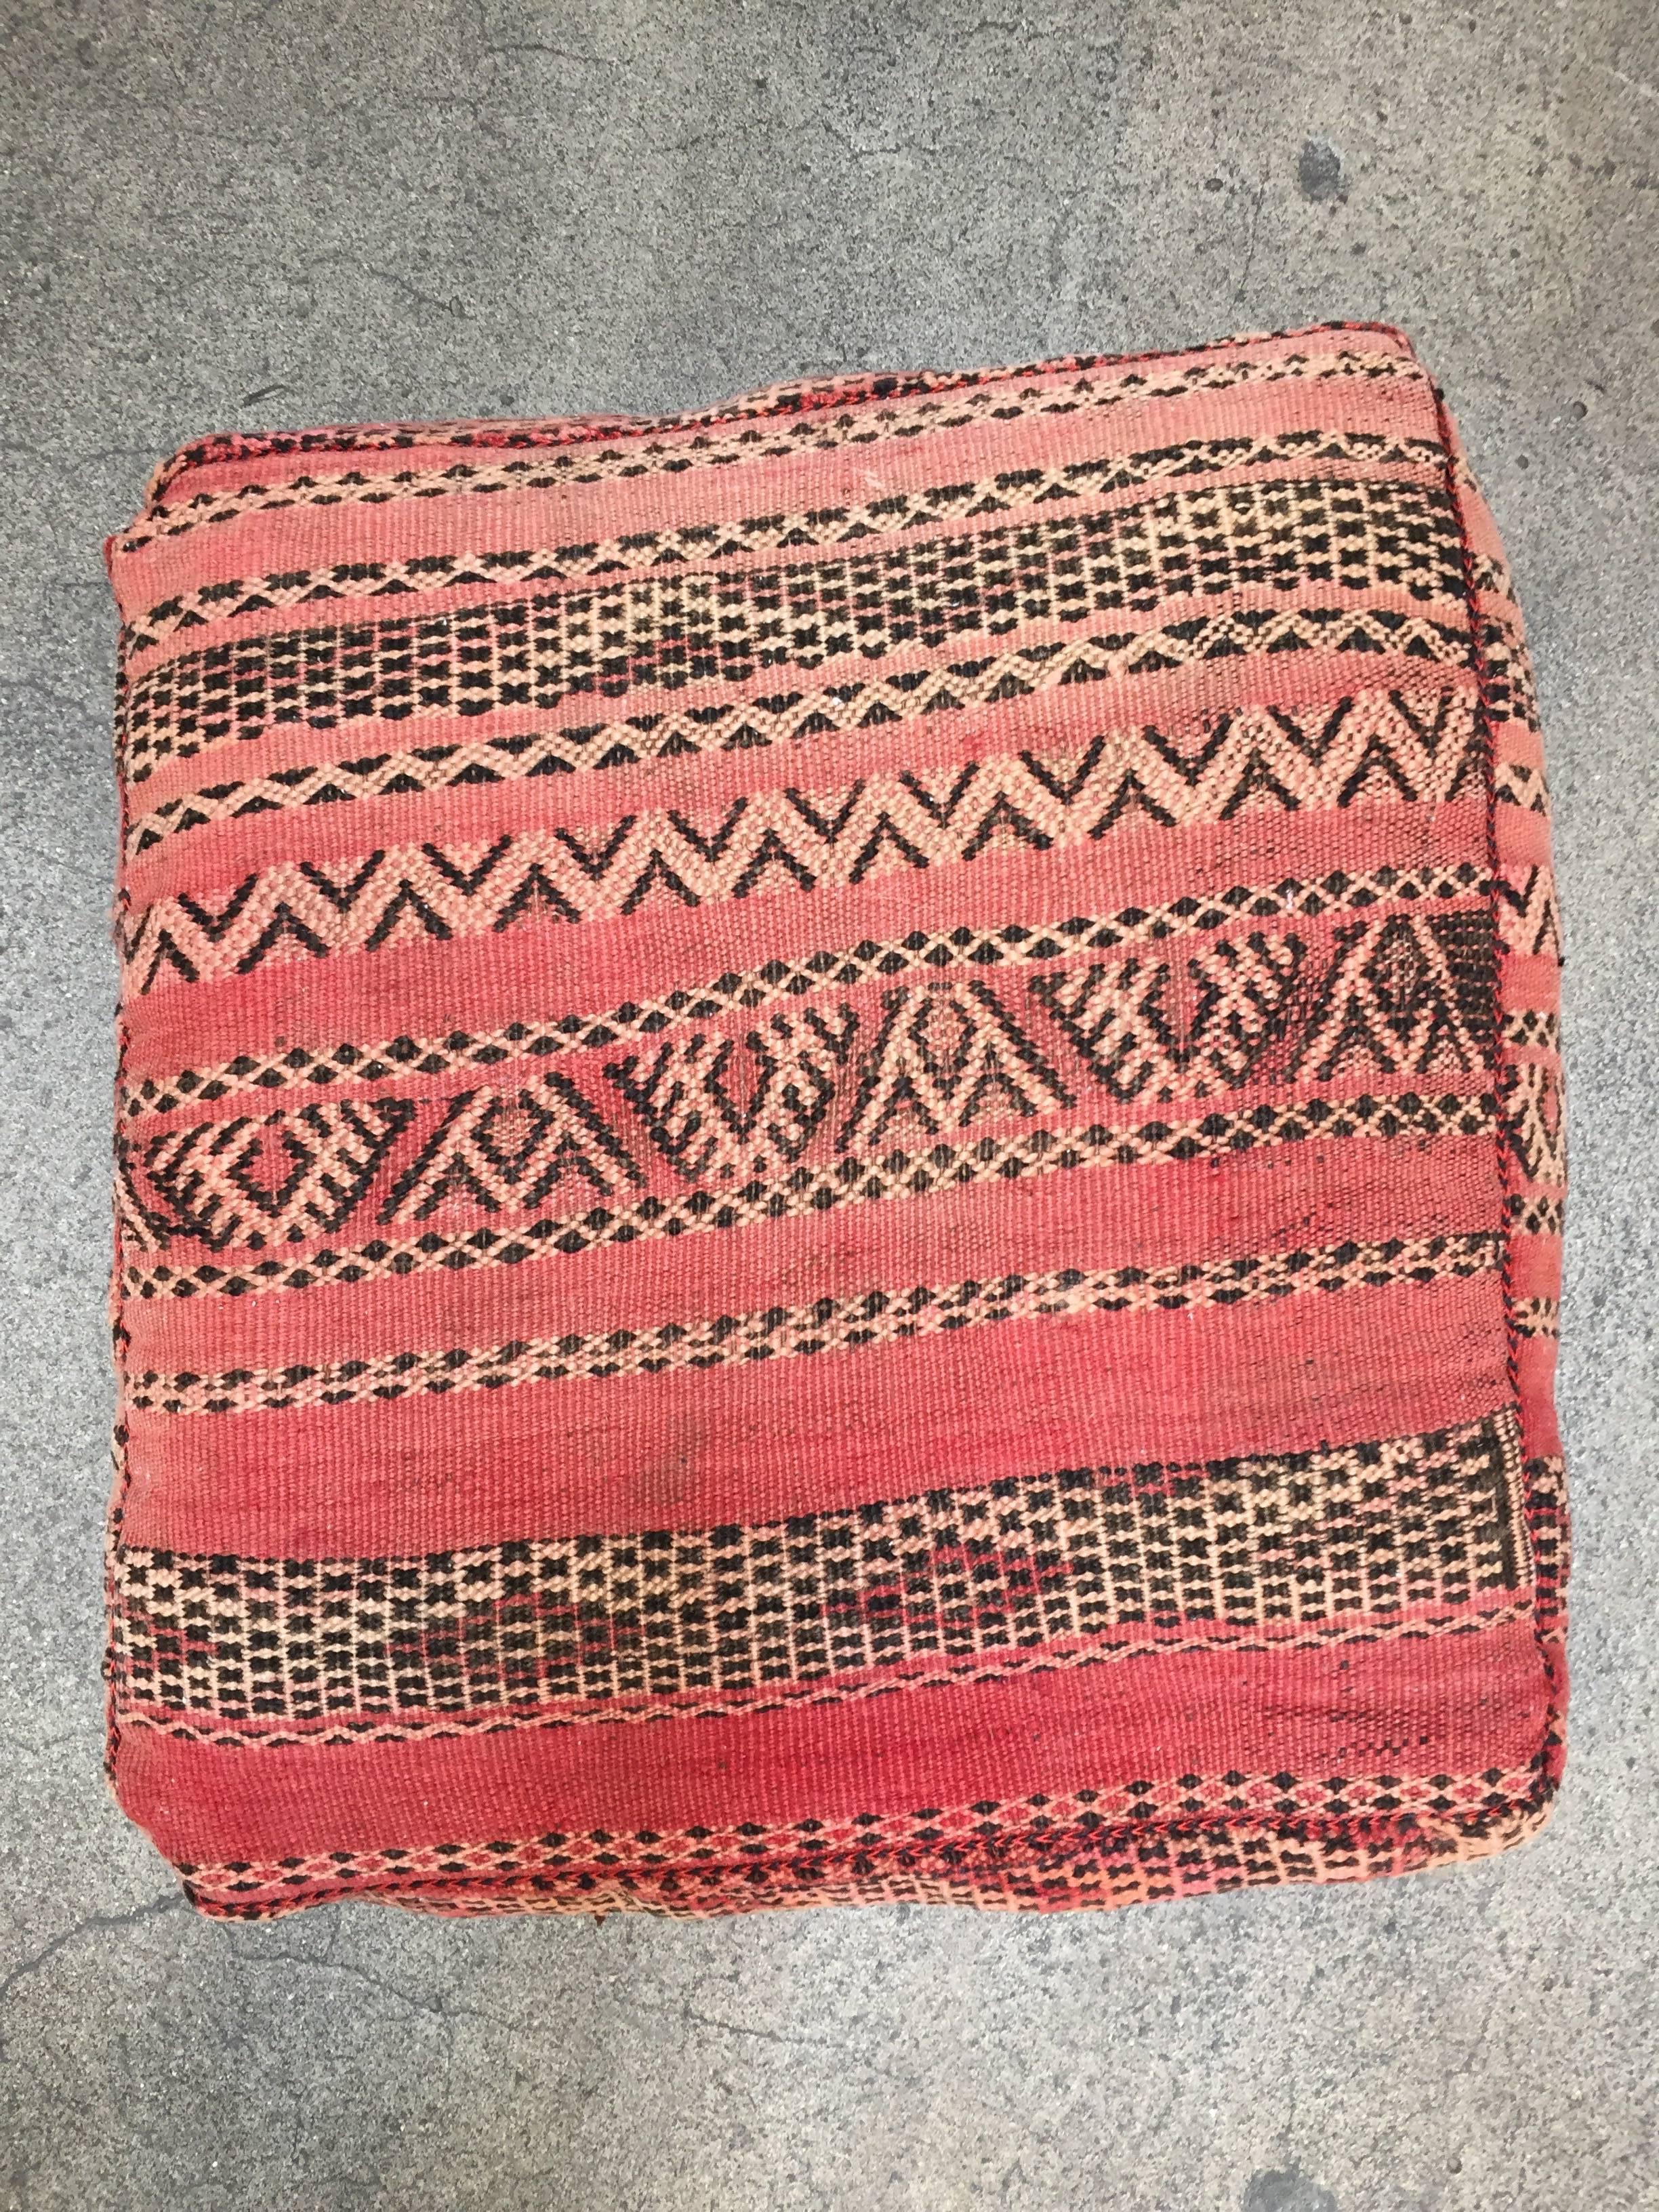 Moroccan Floor Pillow Tribal Seat Cushion Made from a Vintage Berber Rug 4